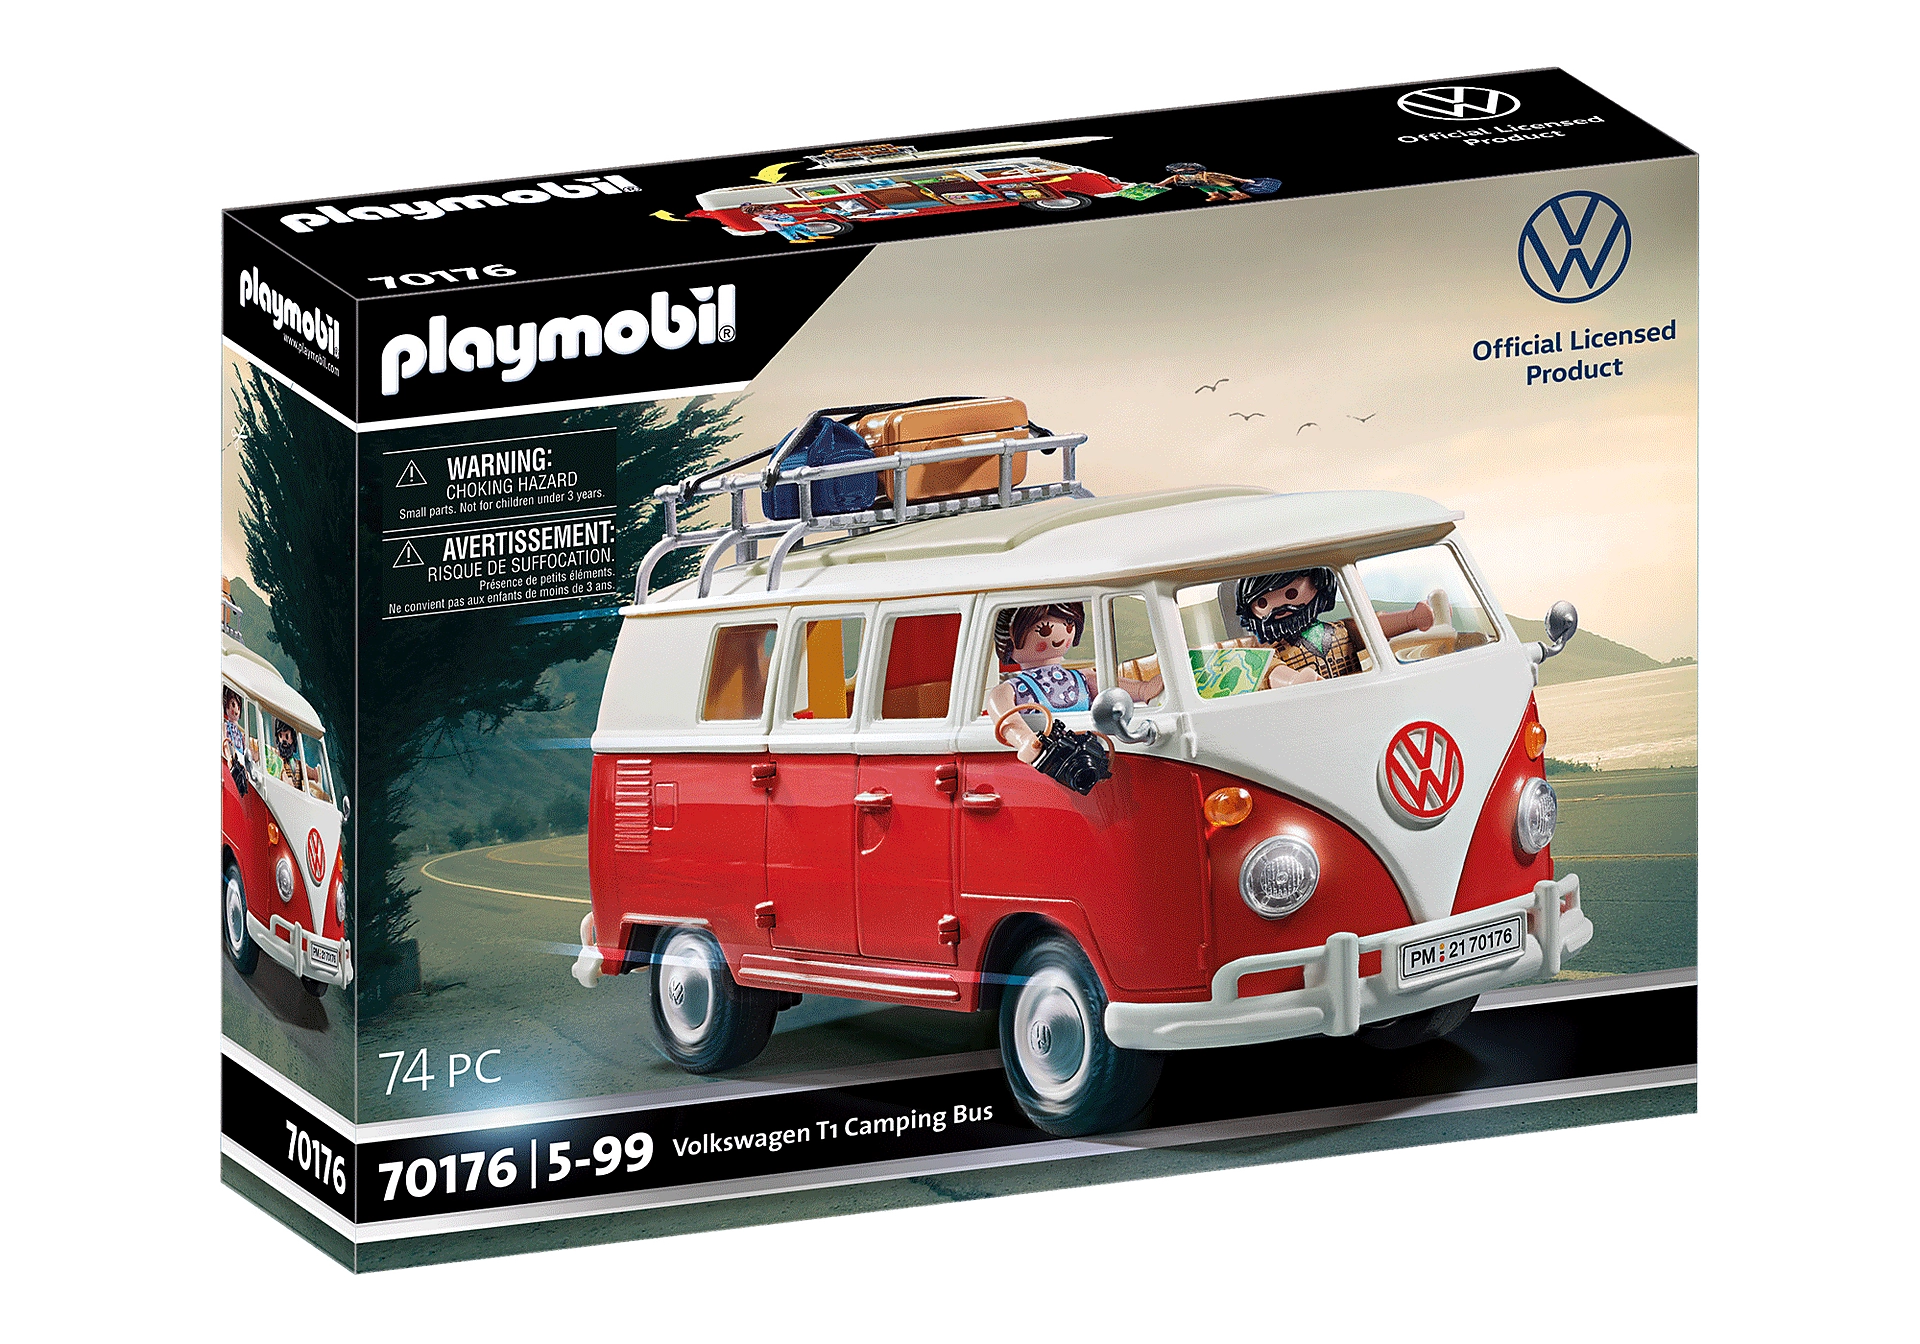 7E9087511A_Volkswagen_T1_Camping_Bus_playmobil_rosier_onlineshop2